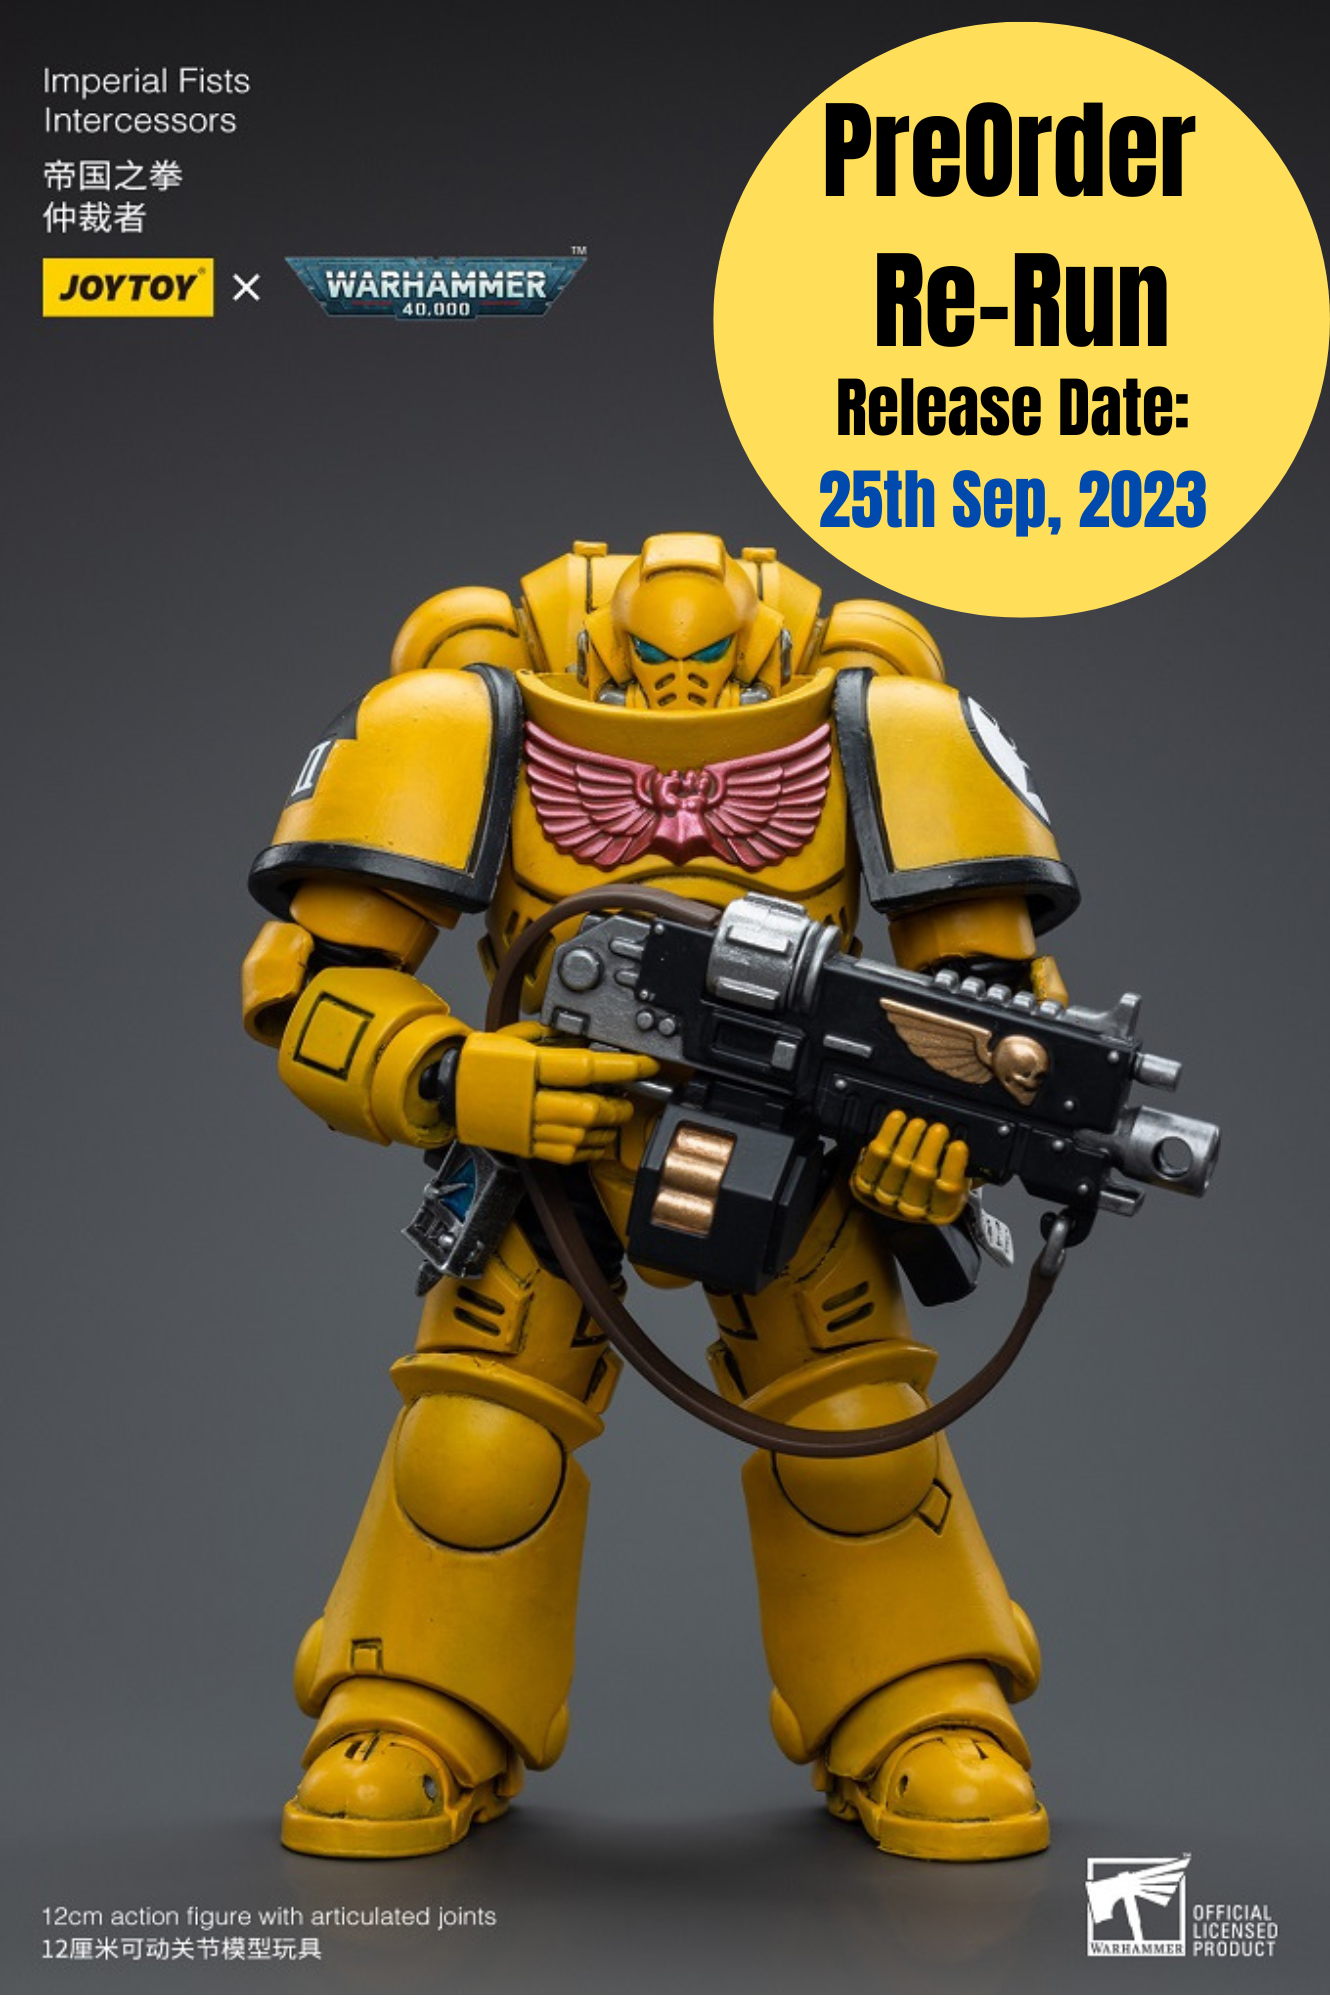 Imperial Fists Intercessors - Warhammer 40K Action Figure By JOYTOY